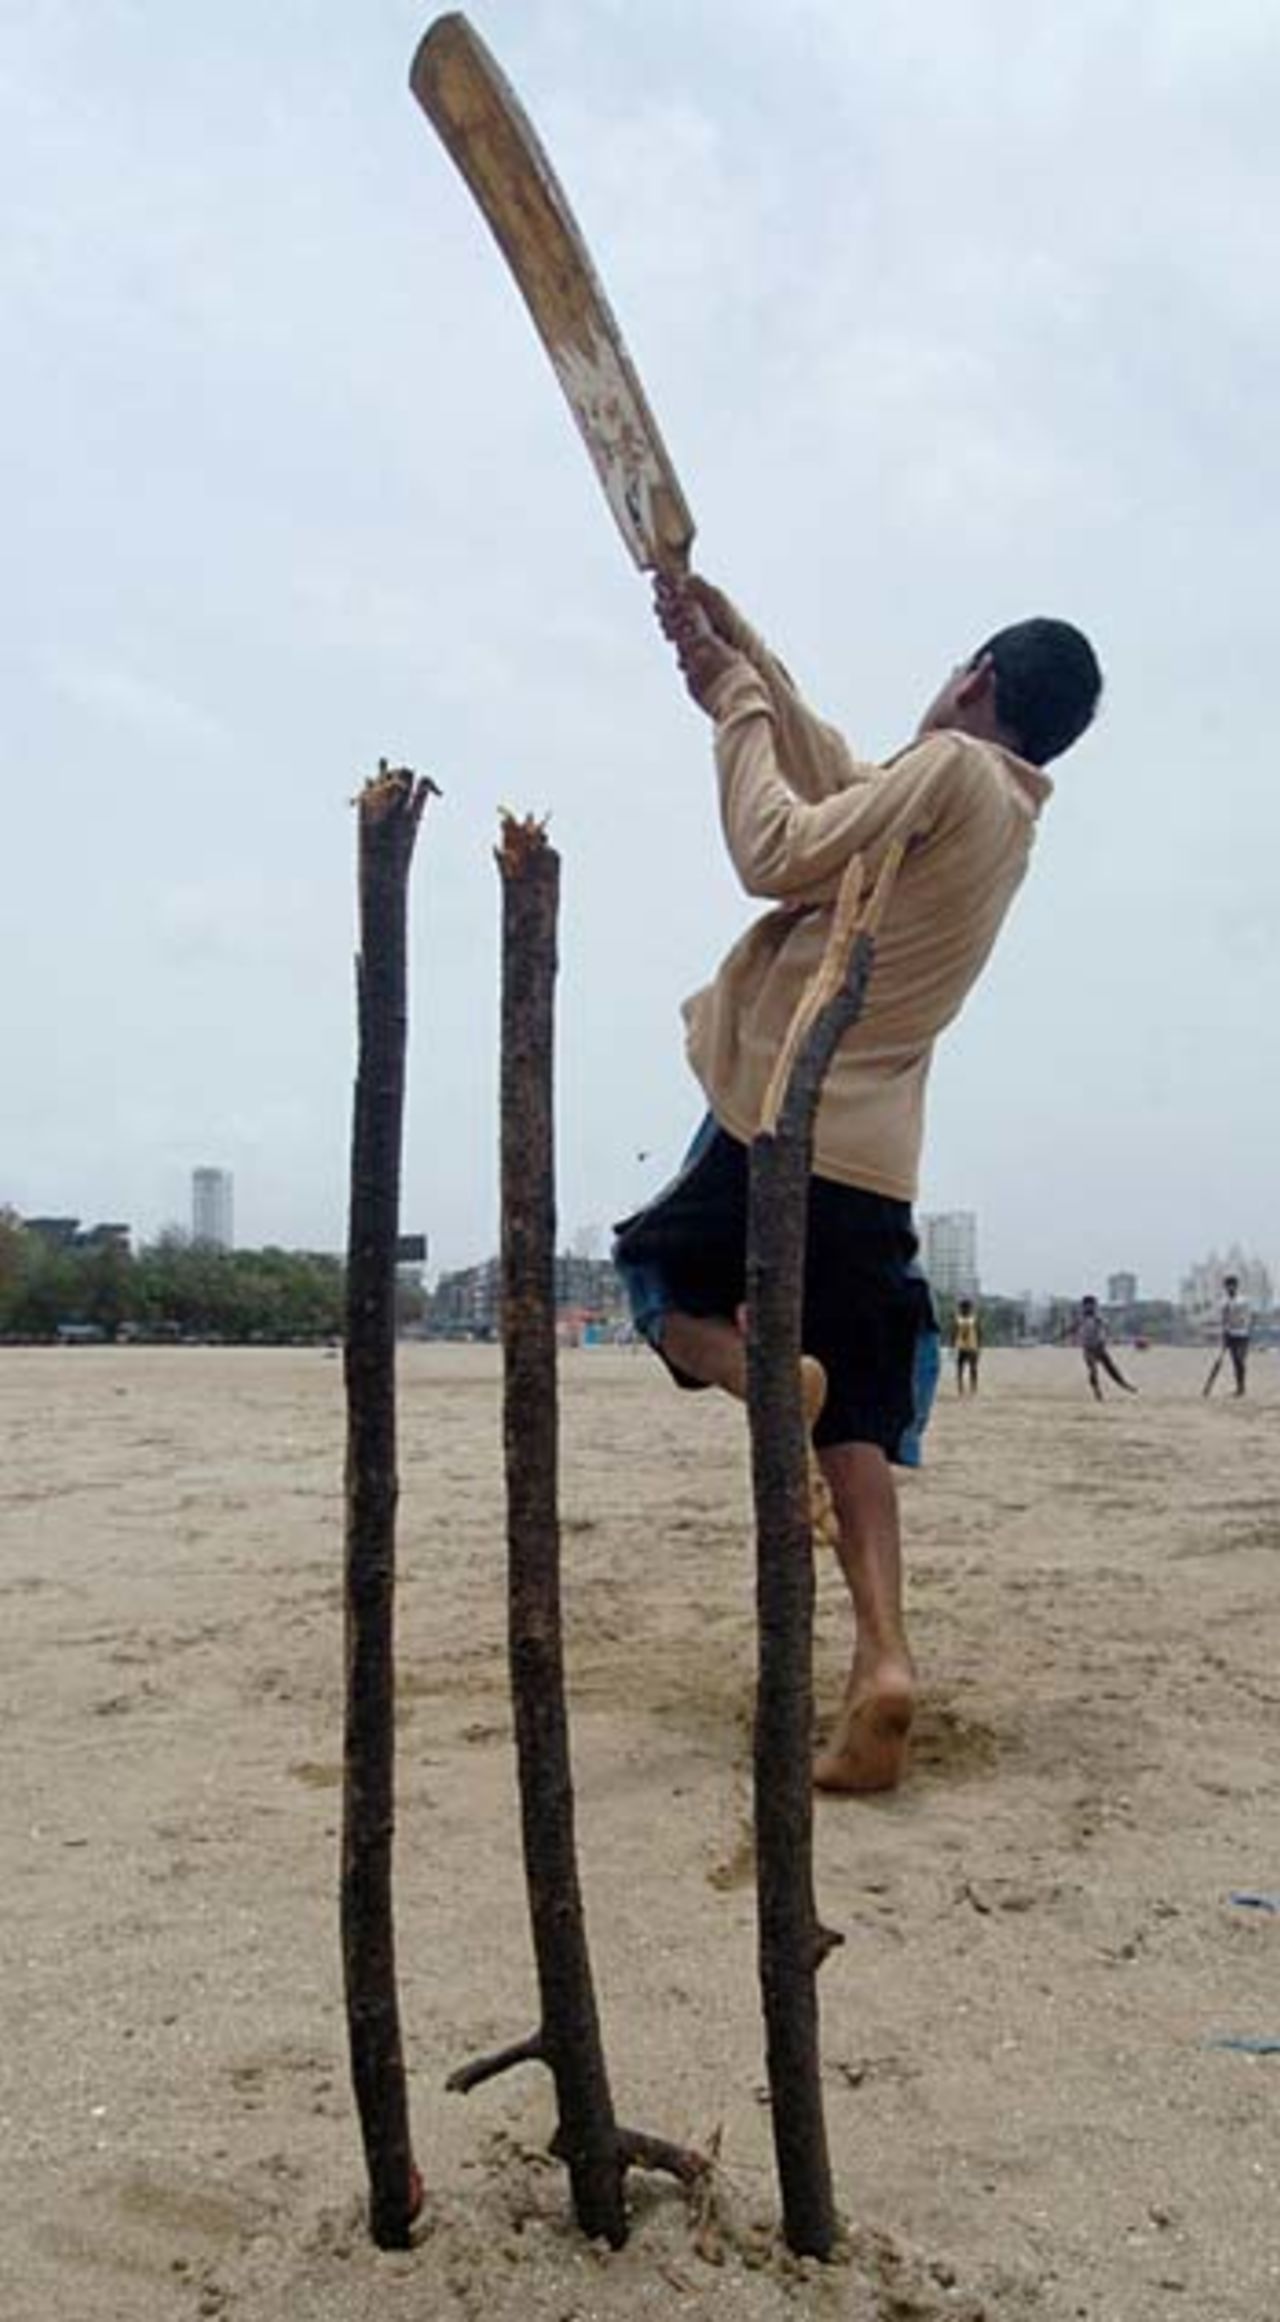 An Indian boy plays cricket using broken branches for stumps at Chowpatty Beach in Mumbai, July 4, 2005